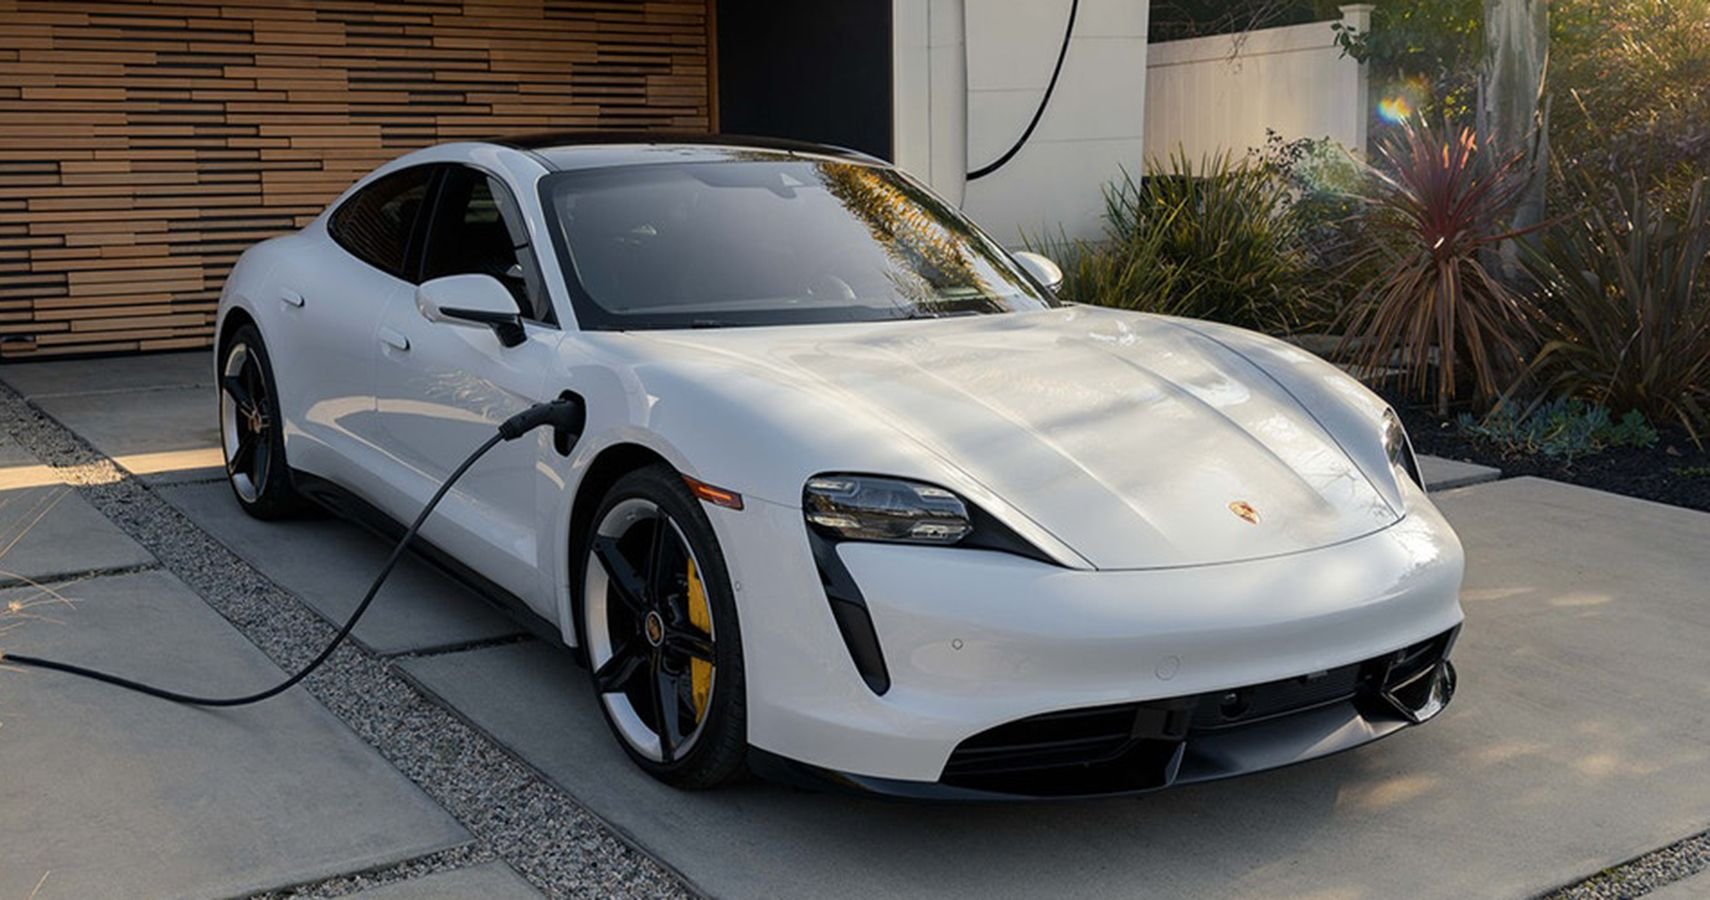 Ranking The Most Expensive Electric Cars On The Market In 2021